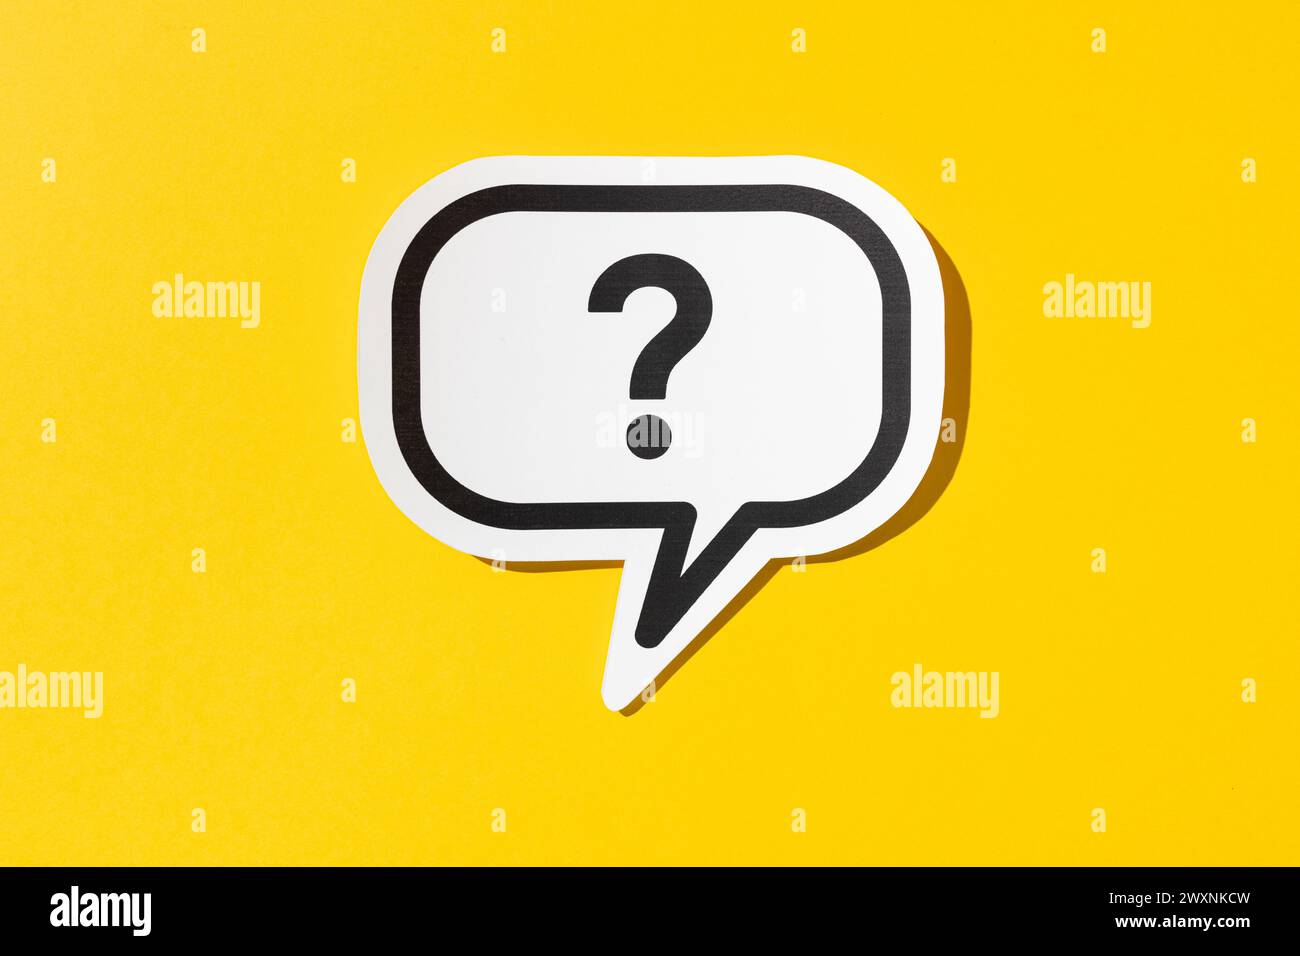 Question mark on speech bubble isolated on yellow background. Doubt, confusion, uncertainty concept Stock Photo